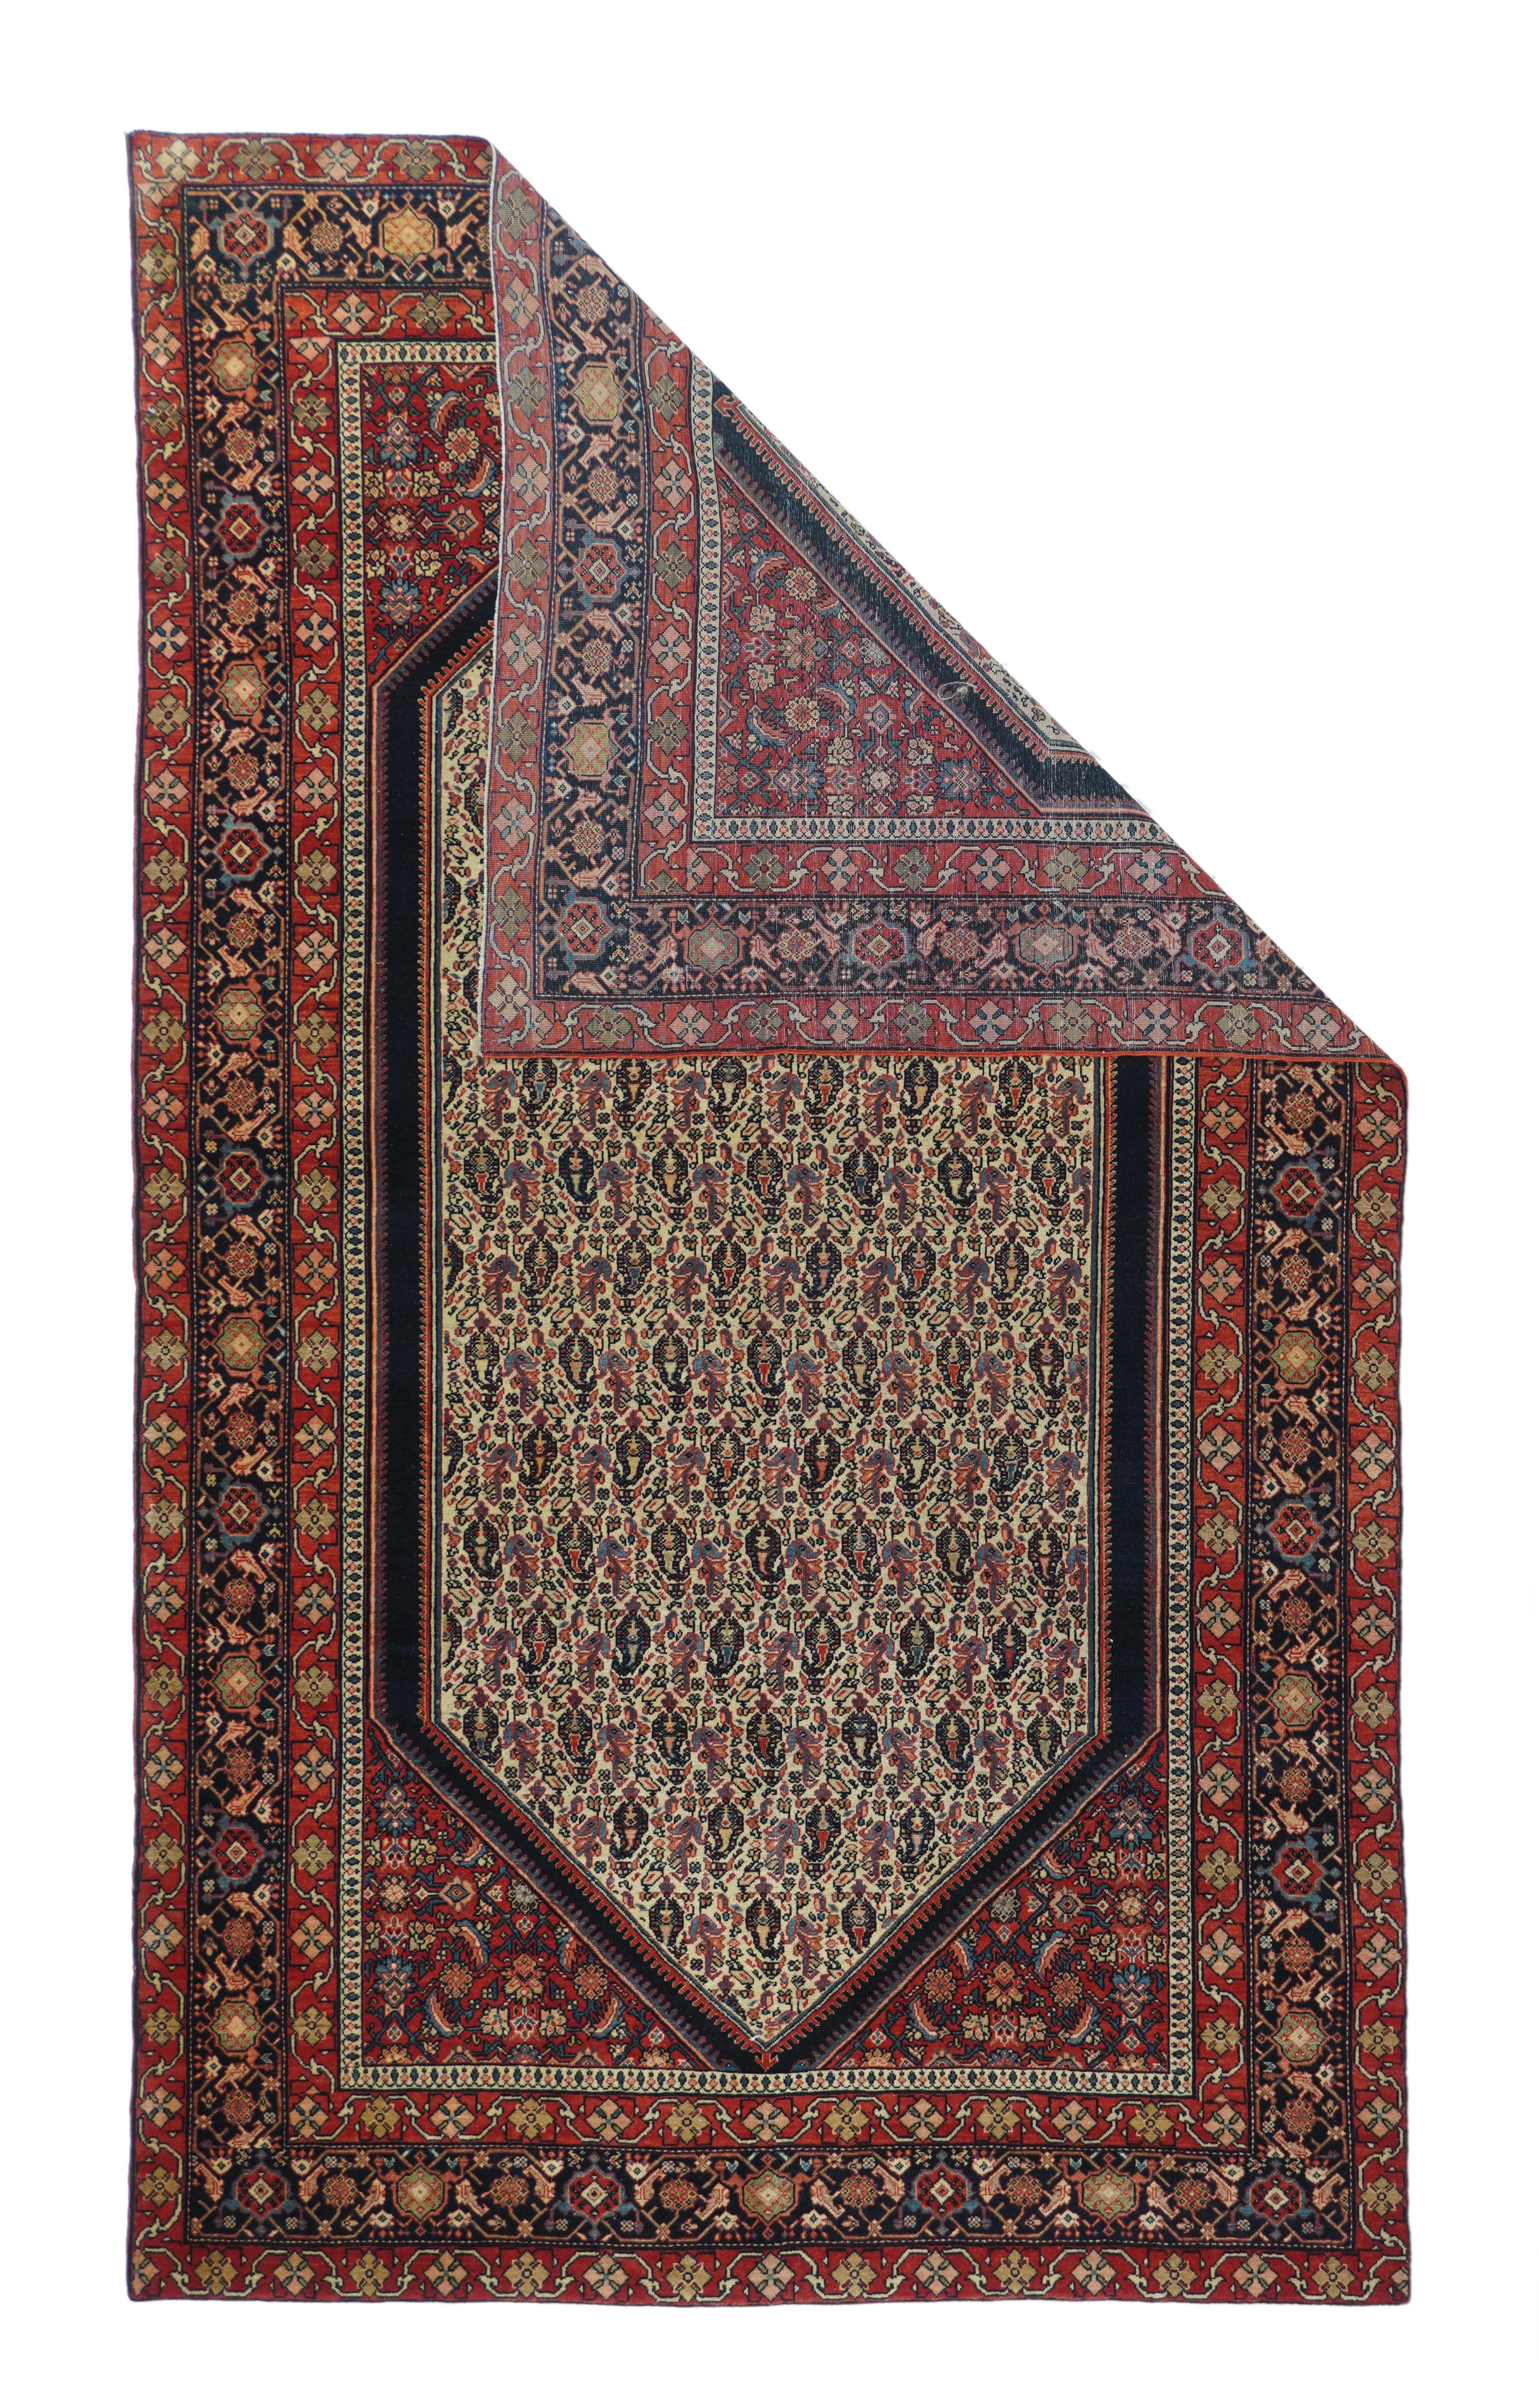 Antique Farahan Sarouk rug, measures: 3'10'' x 6'7''. The tall, hexagonal, sand field is densely covered with reversing rows of floriated botehs and associated leaves and bits of sten. A dark blue plain band surrounds the field and the red